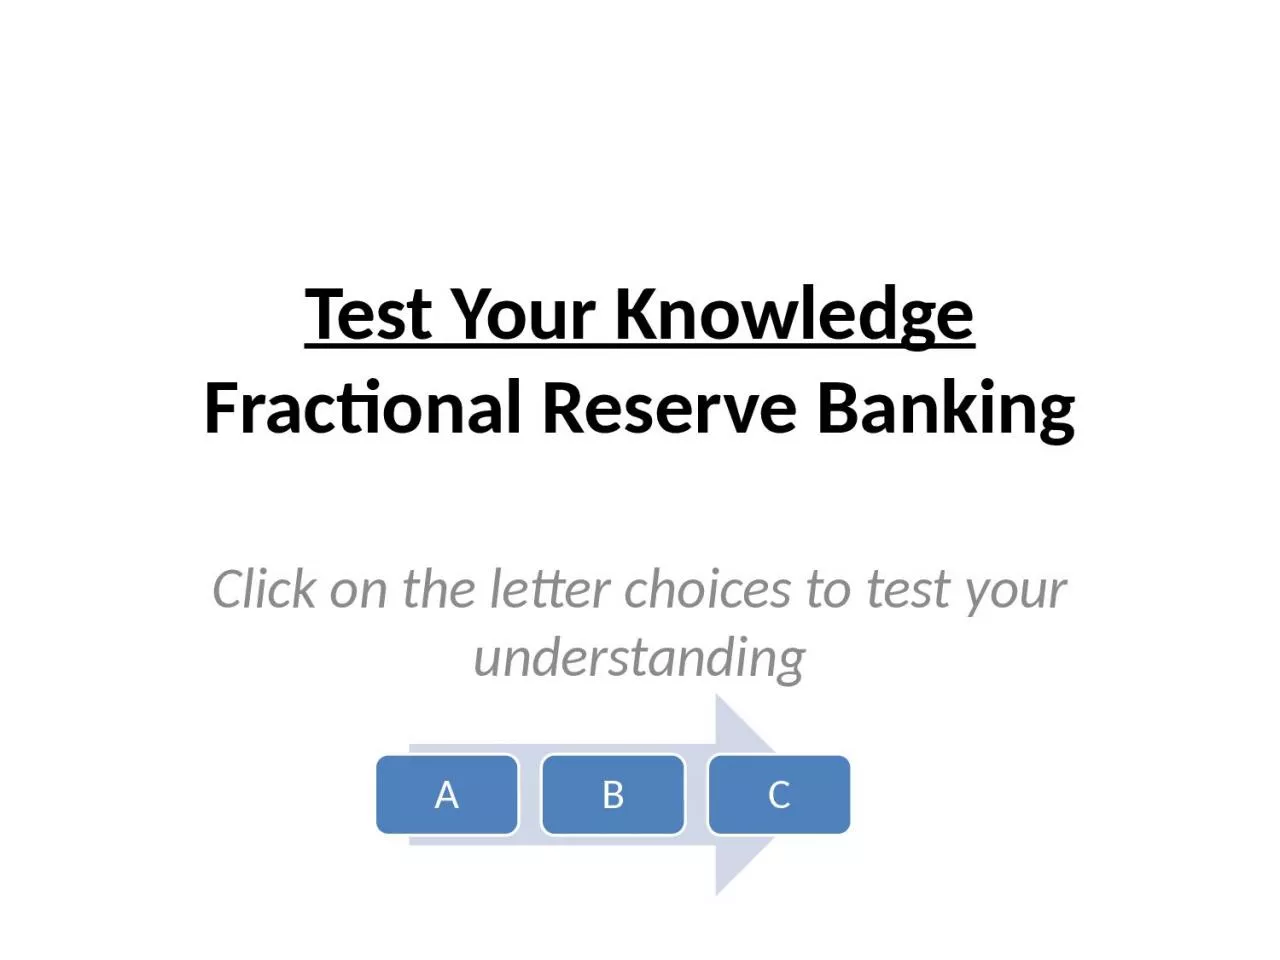 Test Your Knowledge Fractional Reserve Banking